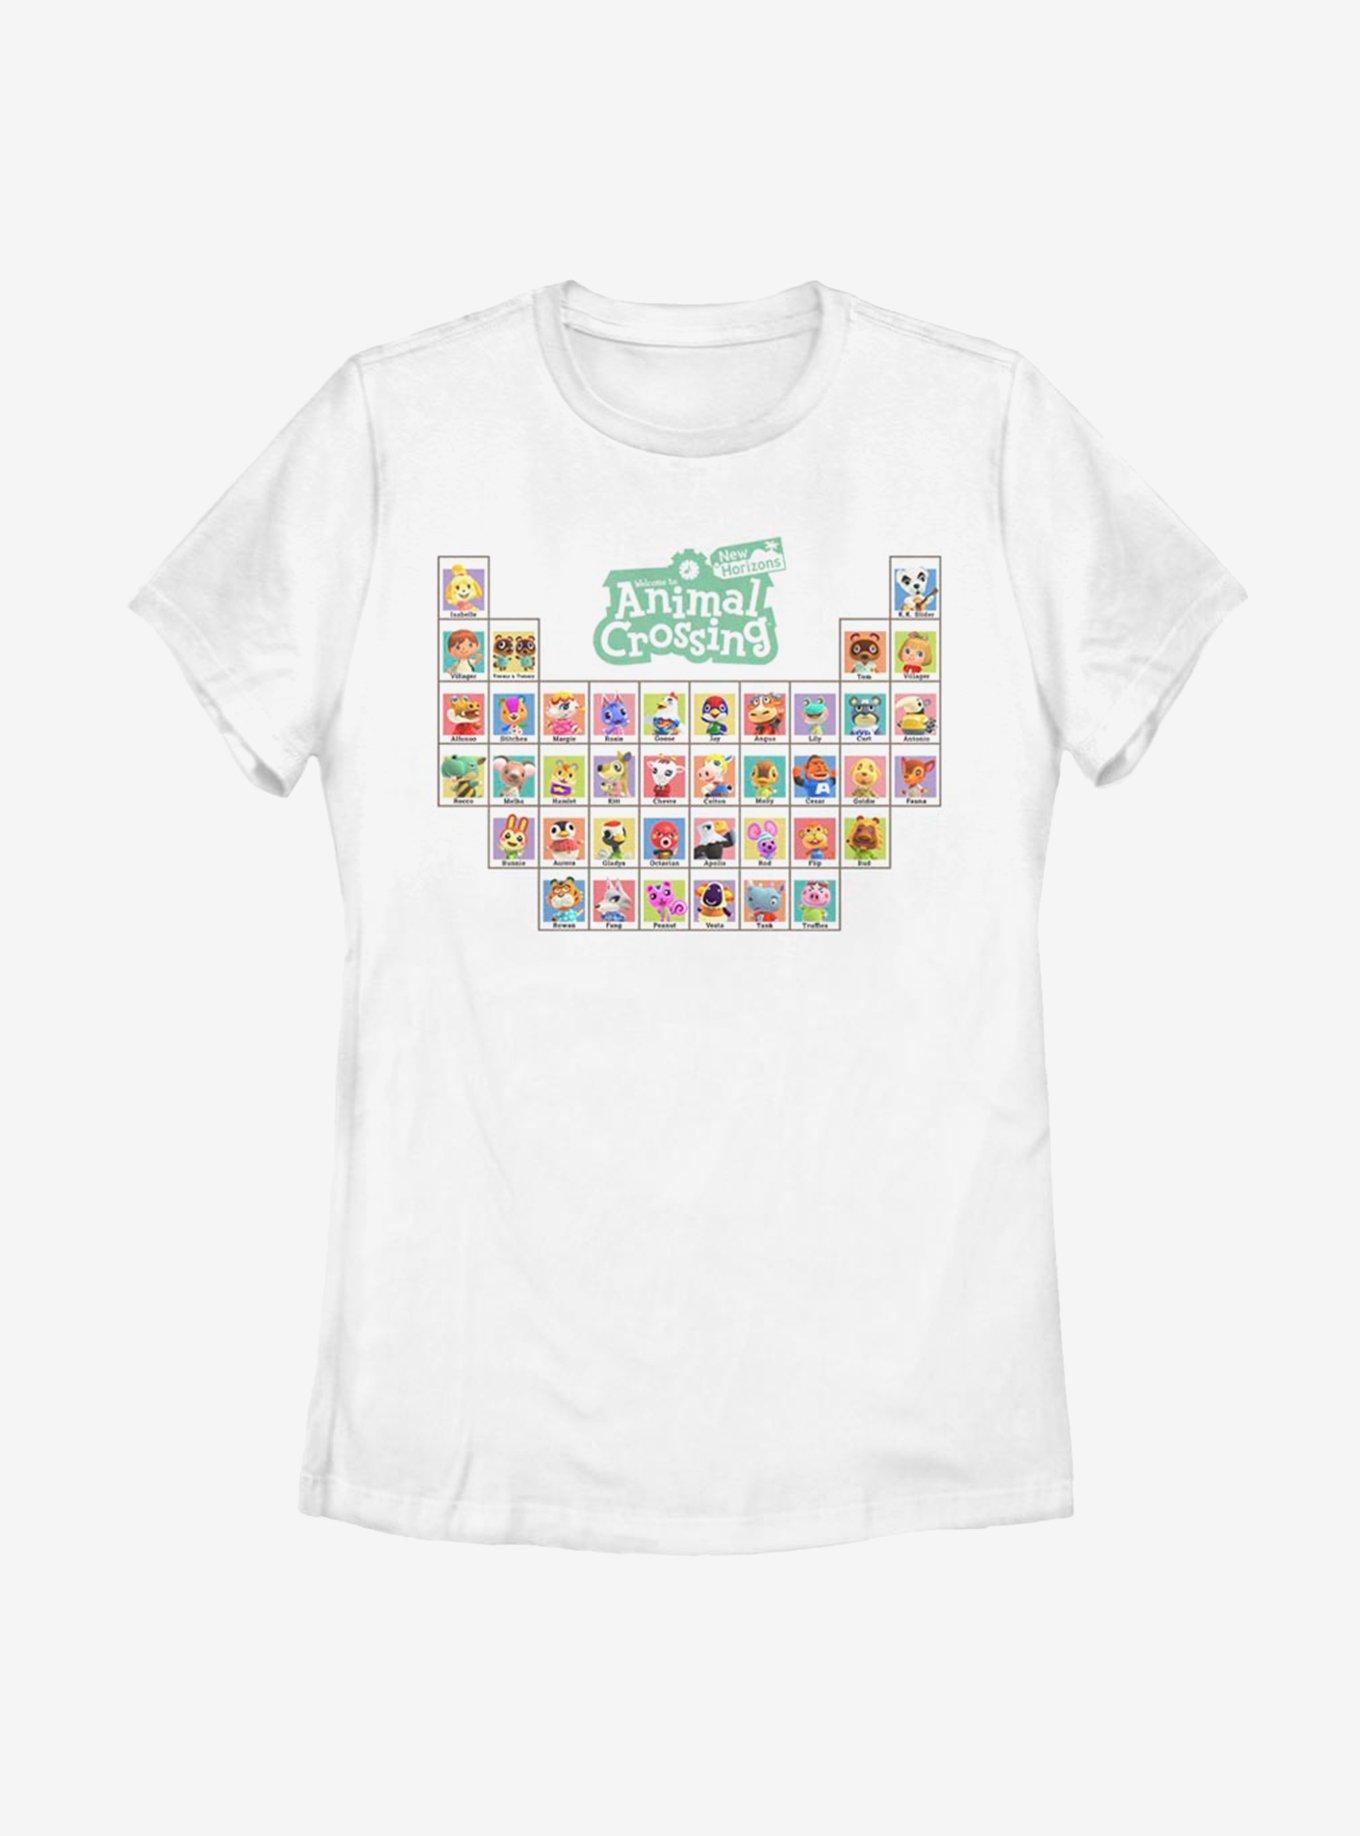 Animal Crossing: New Horizons Periodic Table Of Villagers Womens T-Shirt, , hi-res